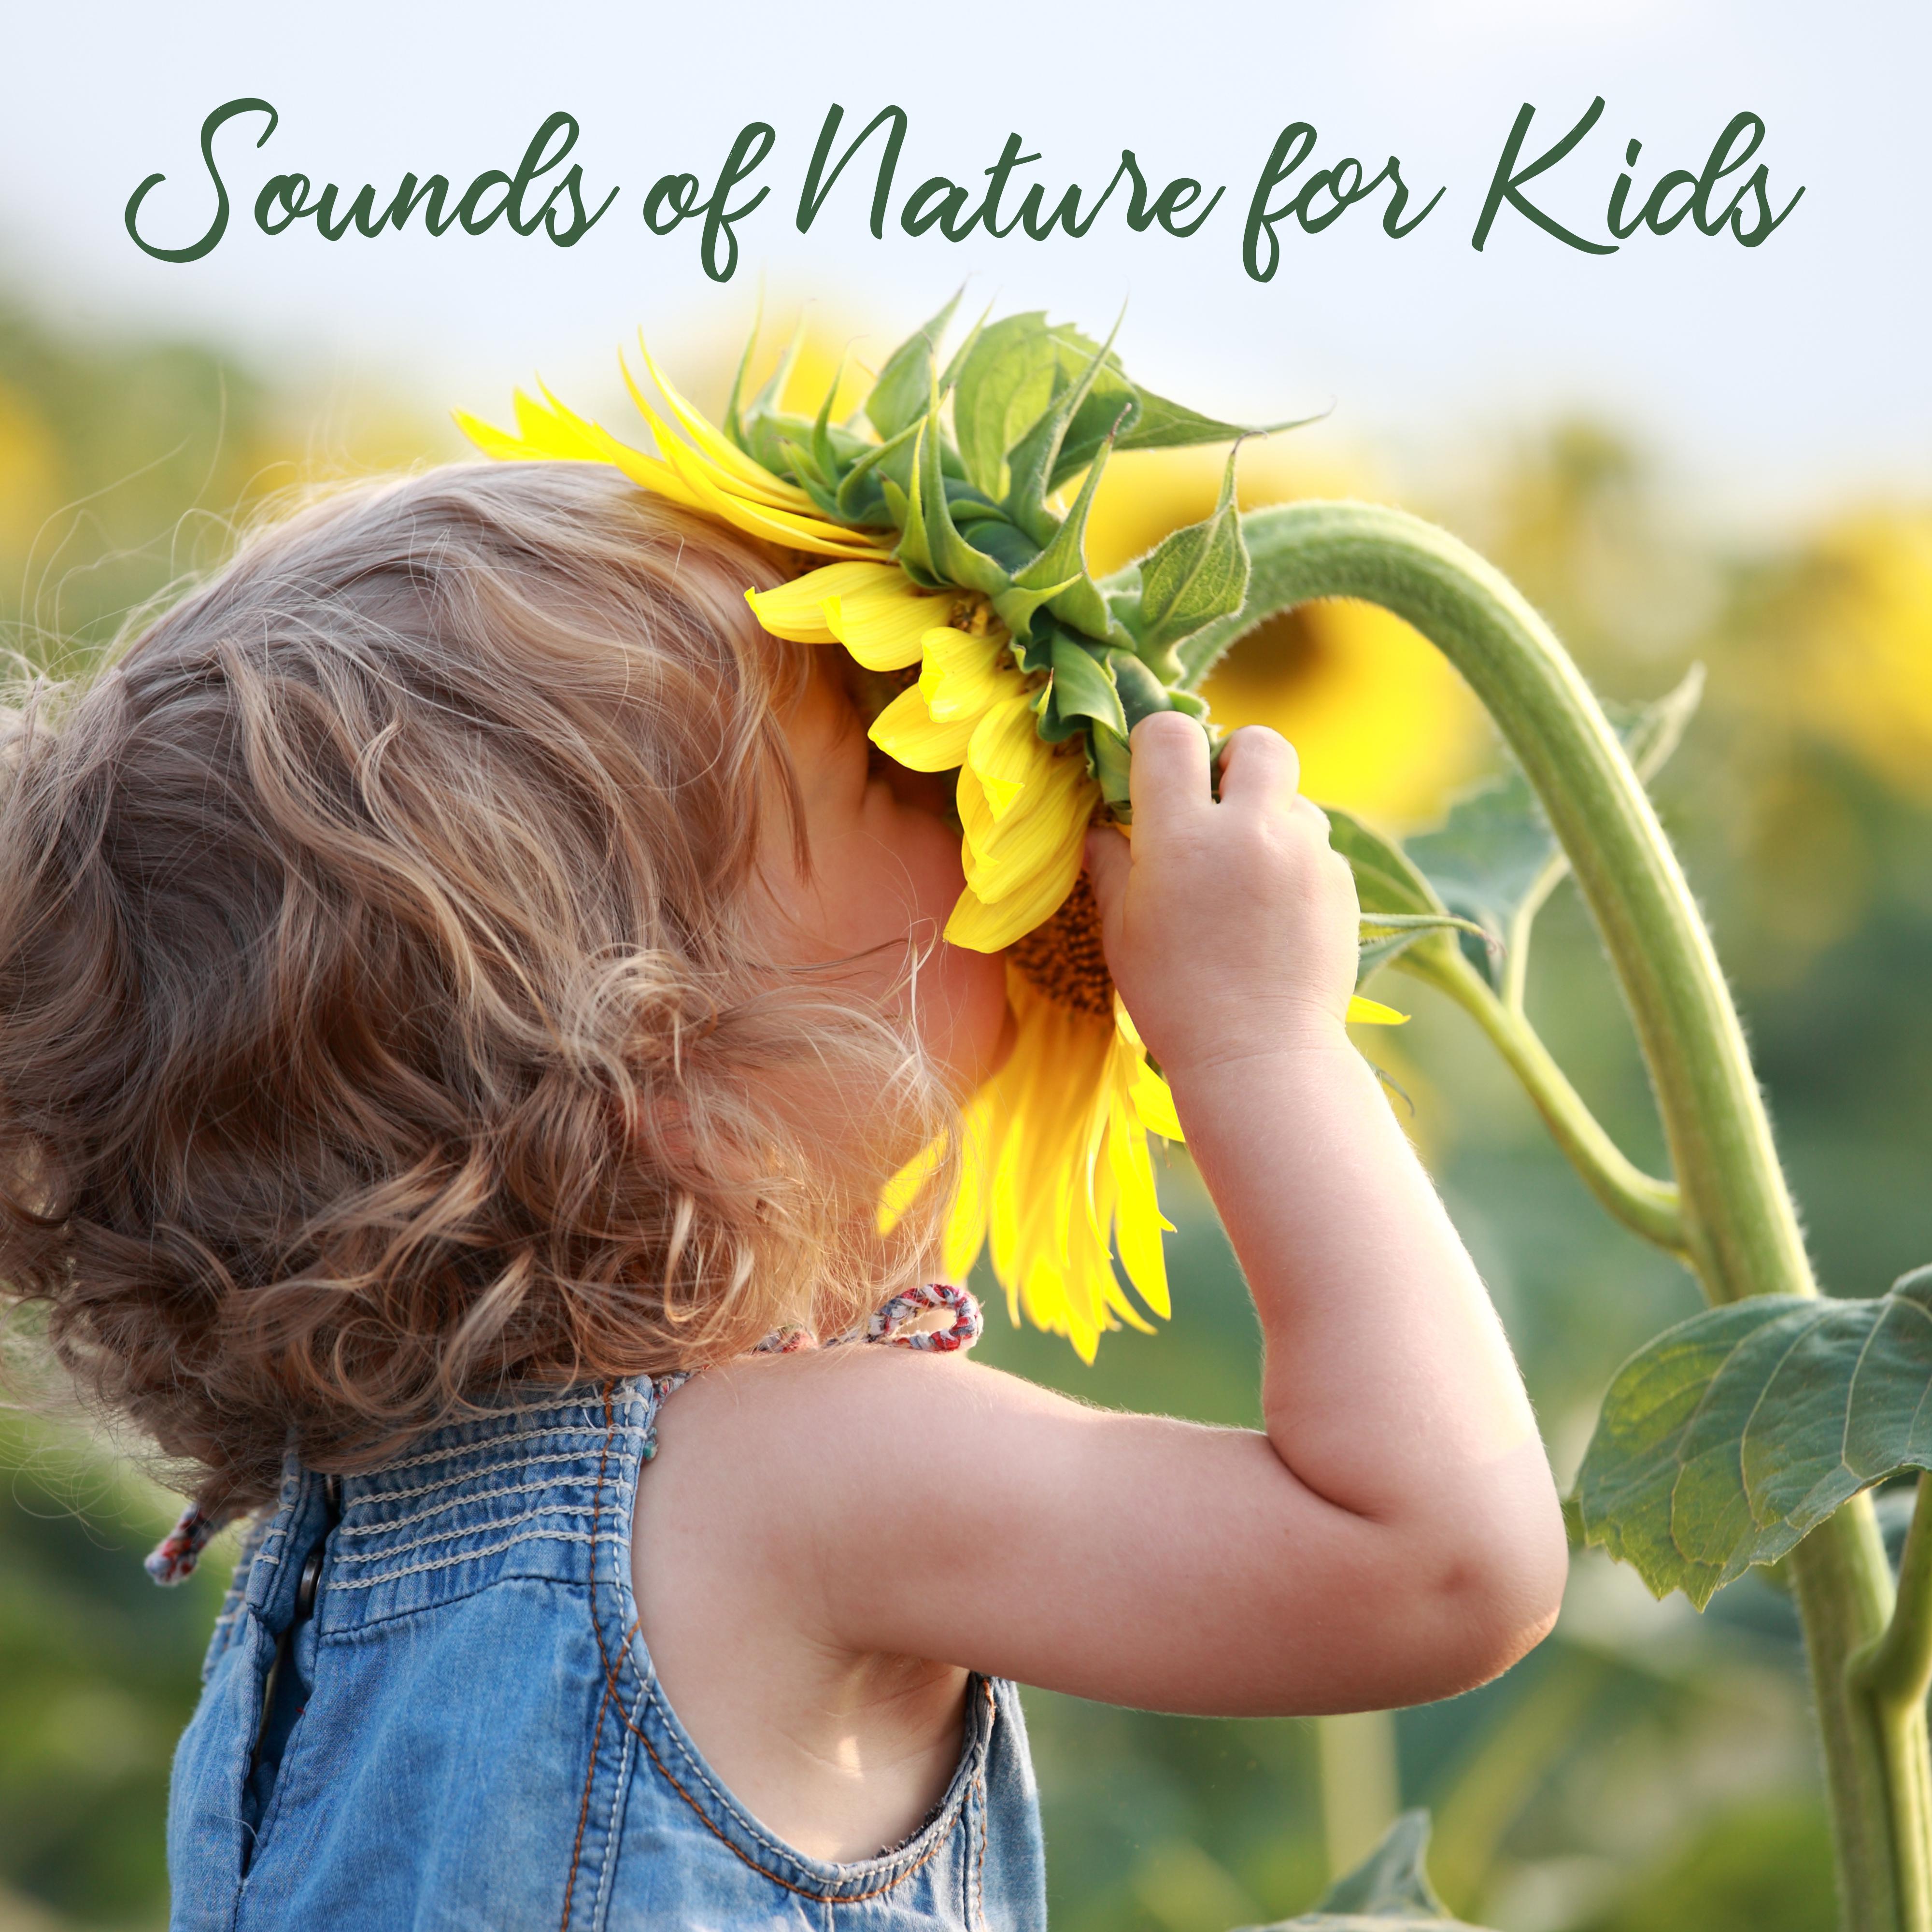 Sounds of Nature for Kids  Soothing Nature Sounds, Deeper Sleep for Baby, Zen, Bedtime Baby, New Age Lullabies at Night, Relaxing Music